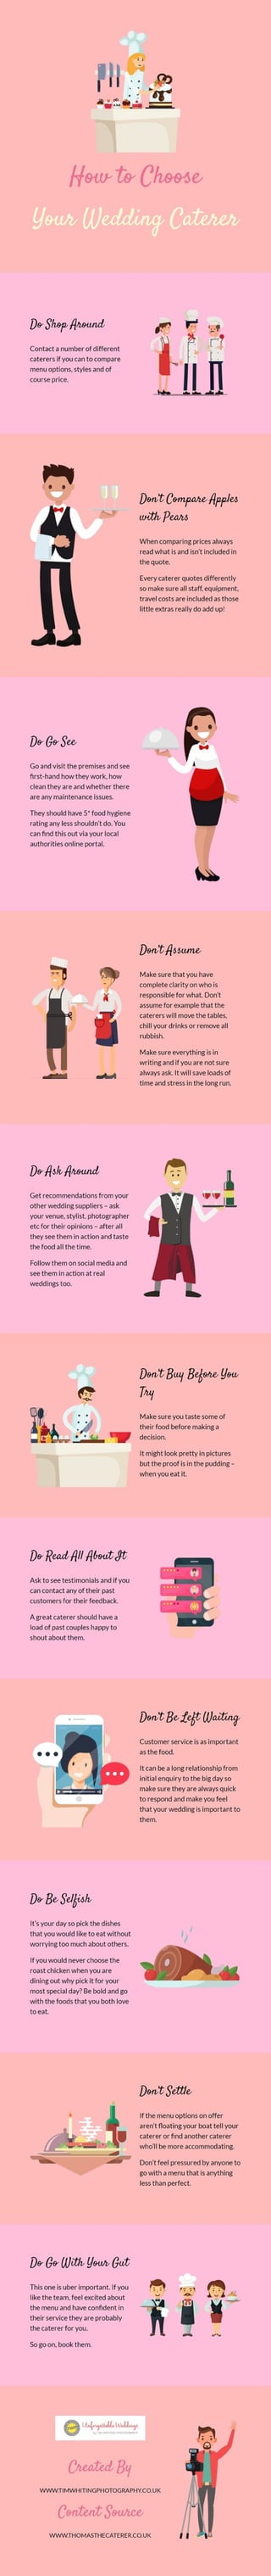 How to choose your wedding caterer